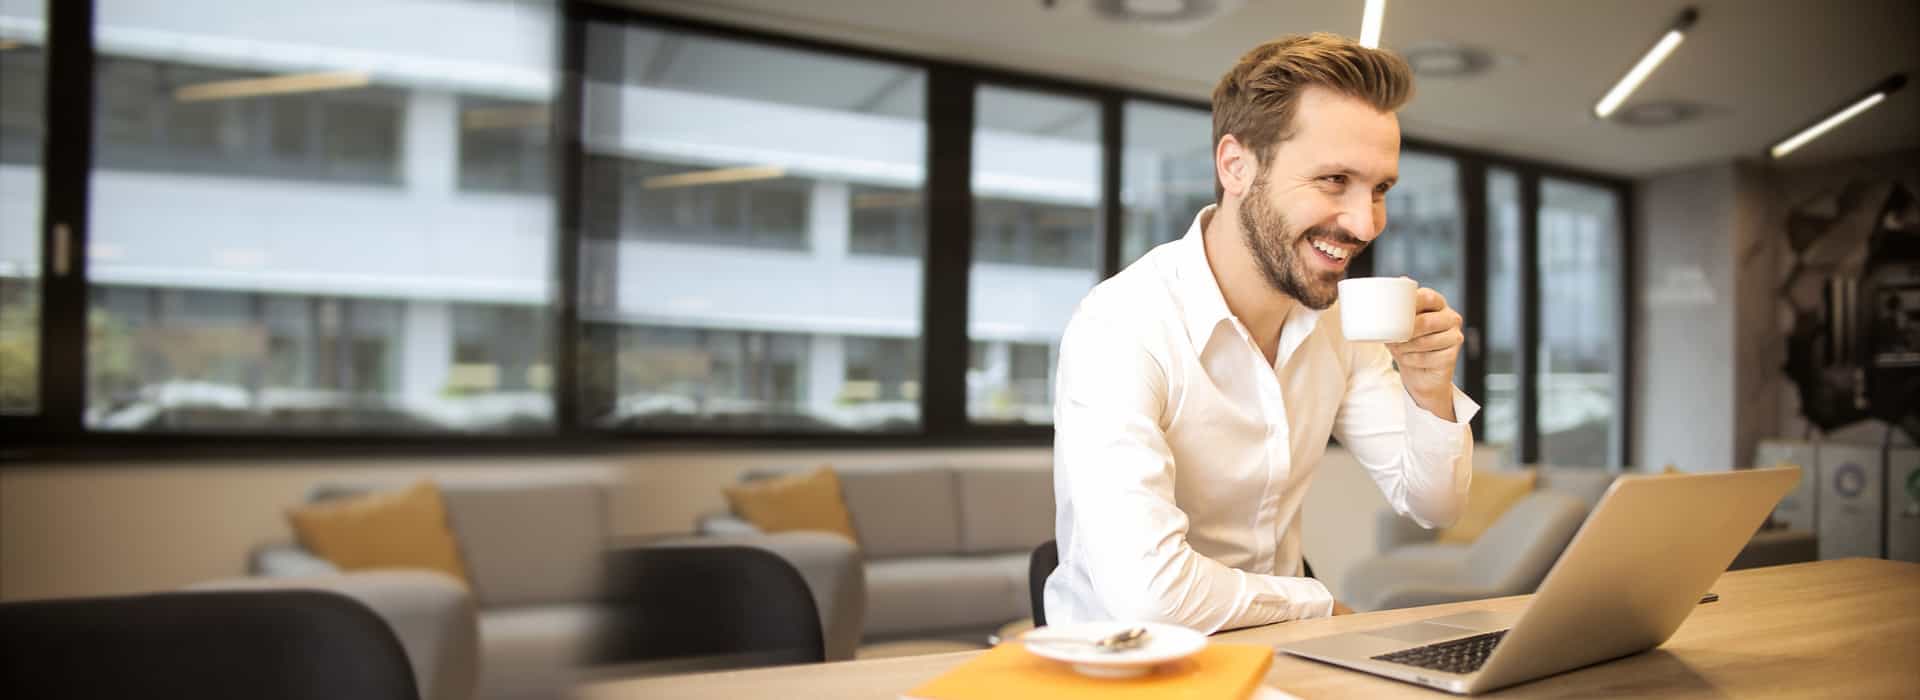 Man smiling at computer with coffee